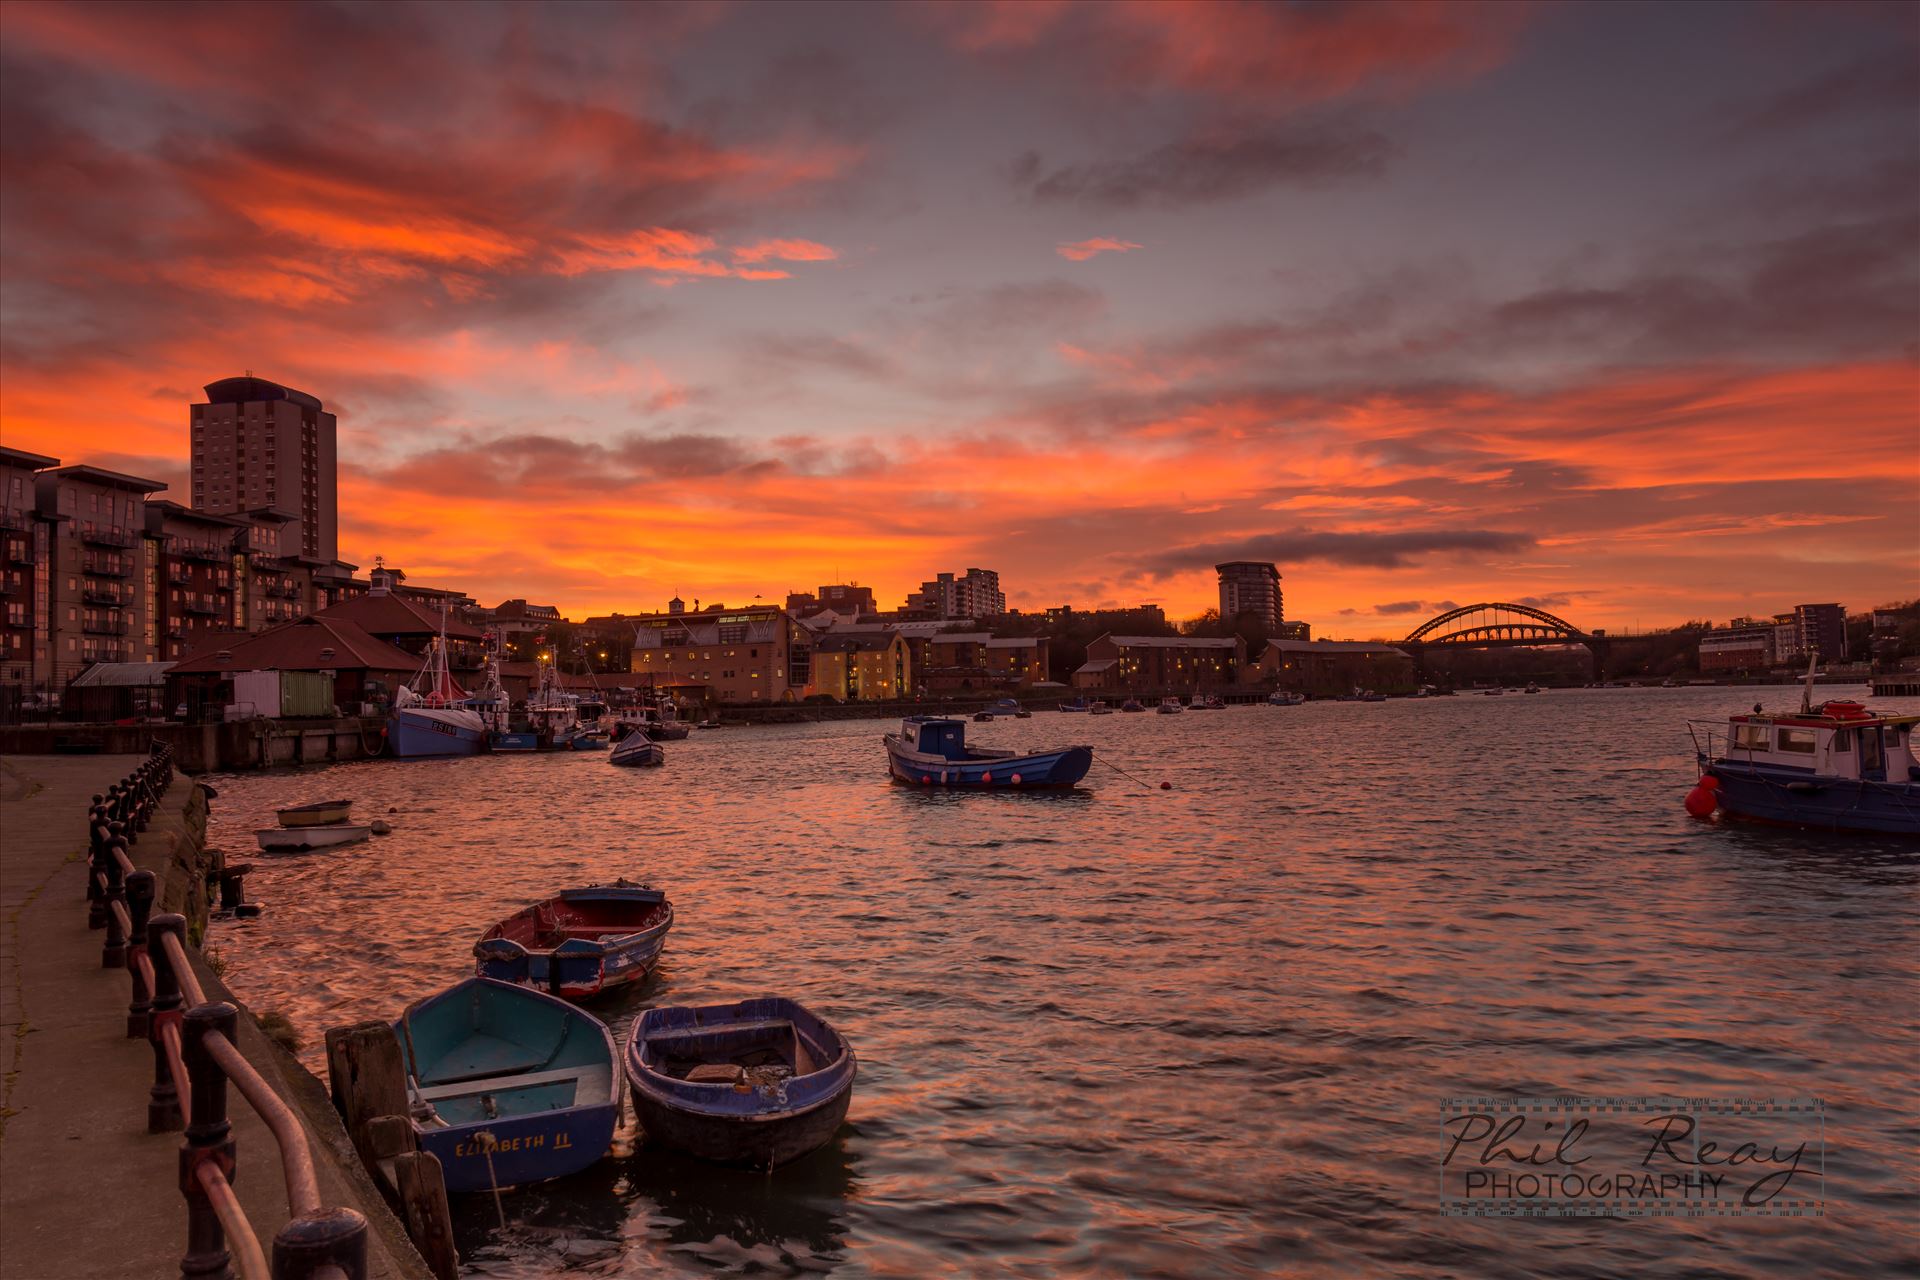 Sky on Fire - A fabulous sunset at Sunderland Fish Quay by philreay